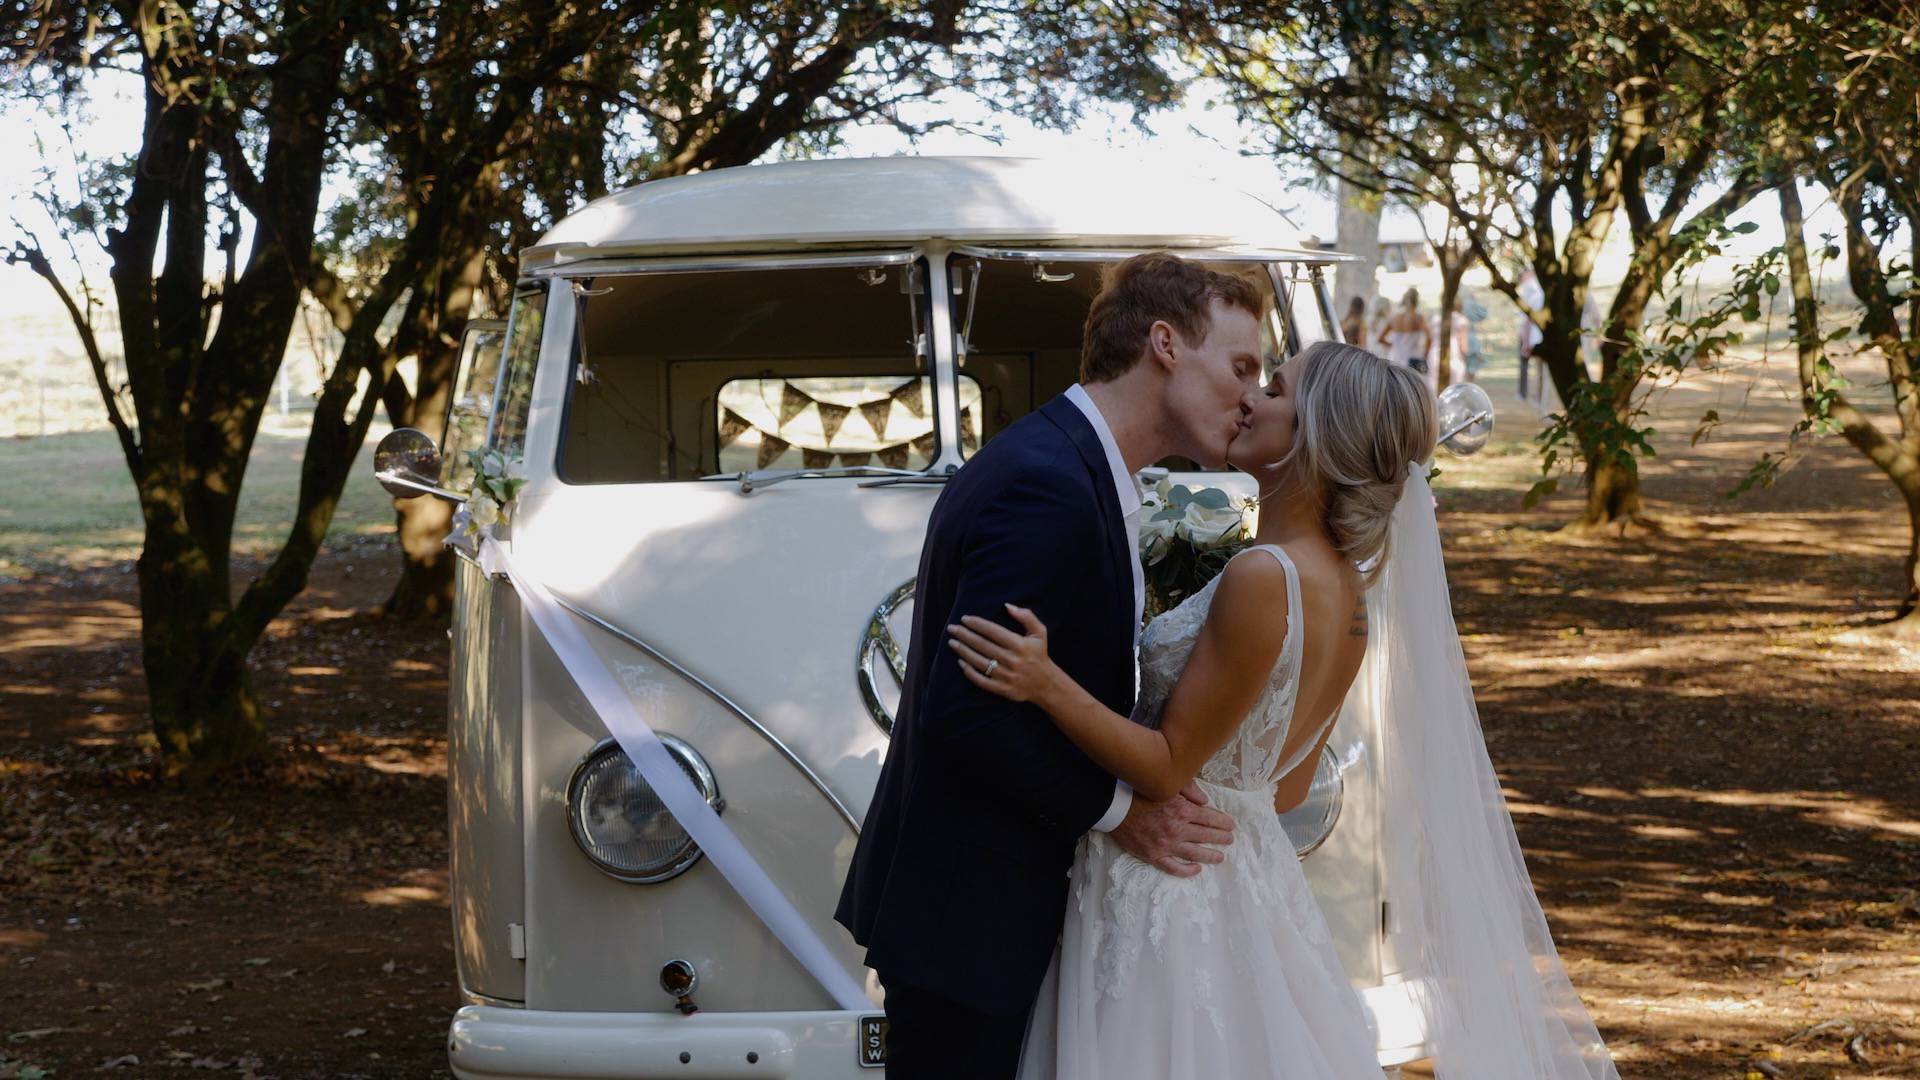 Newly married couple in front of kombi van - wedding videography services in Byron Bay and surrounding areas - Lovereel